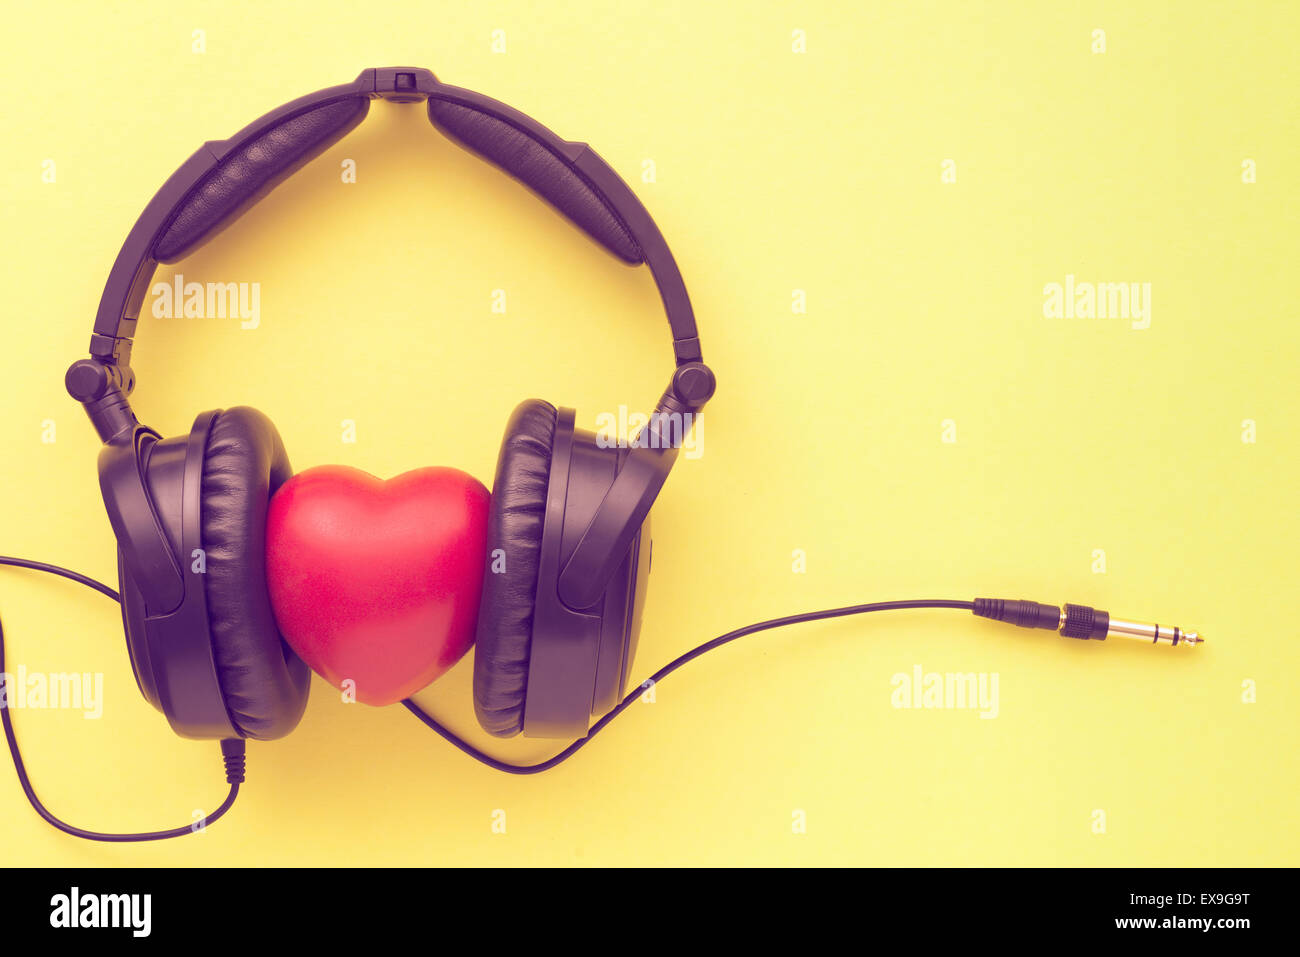 black headphones with red heart, wires and socket on yellow background Stock Photo